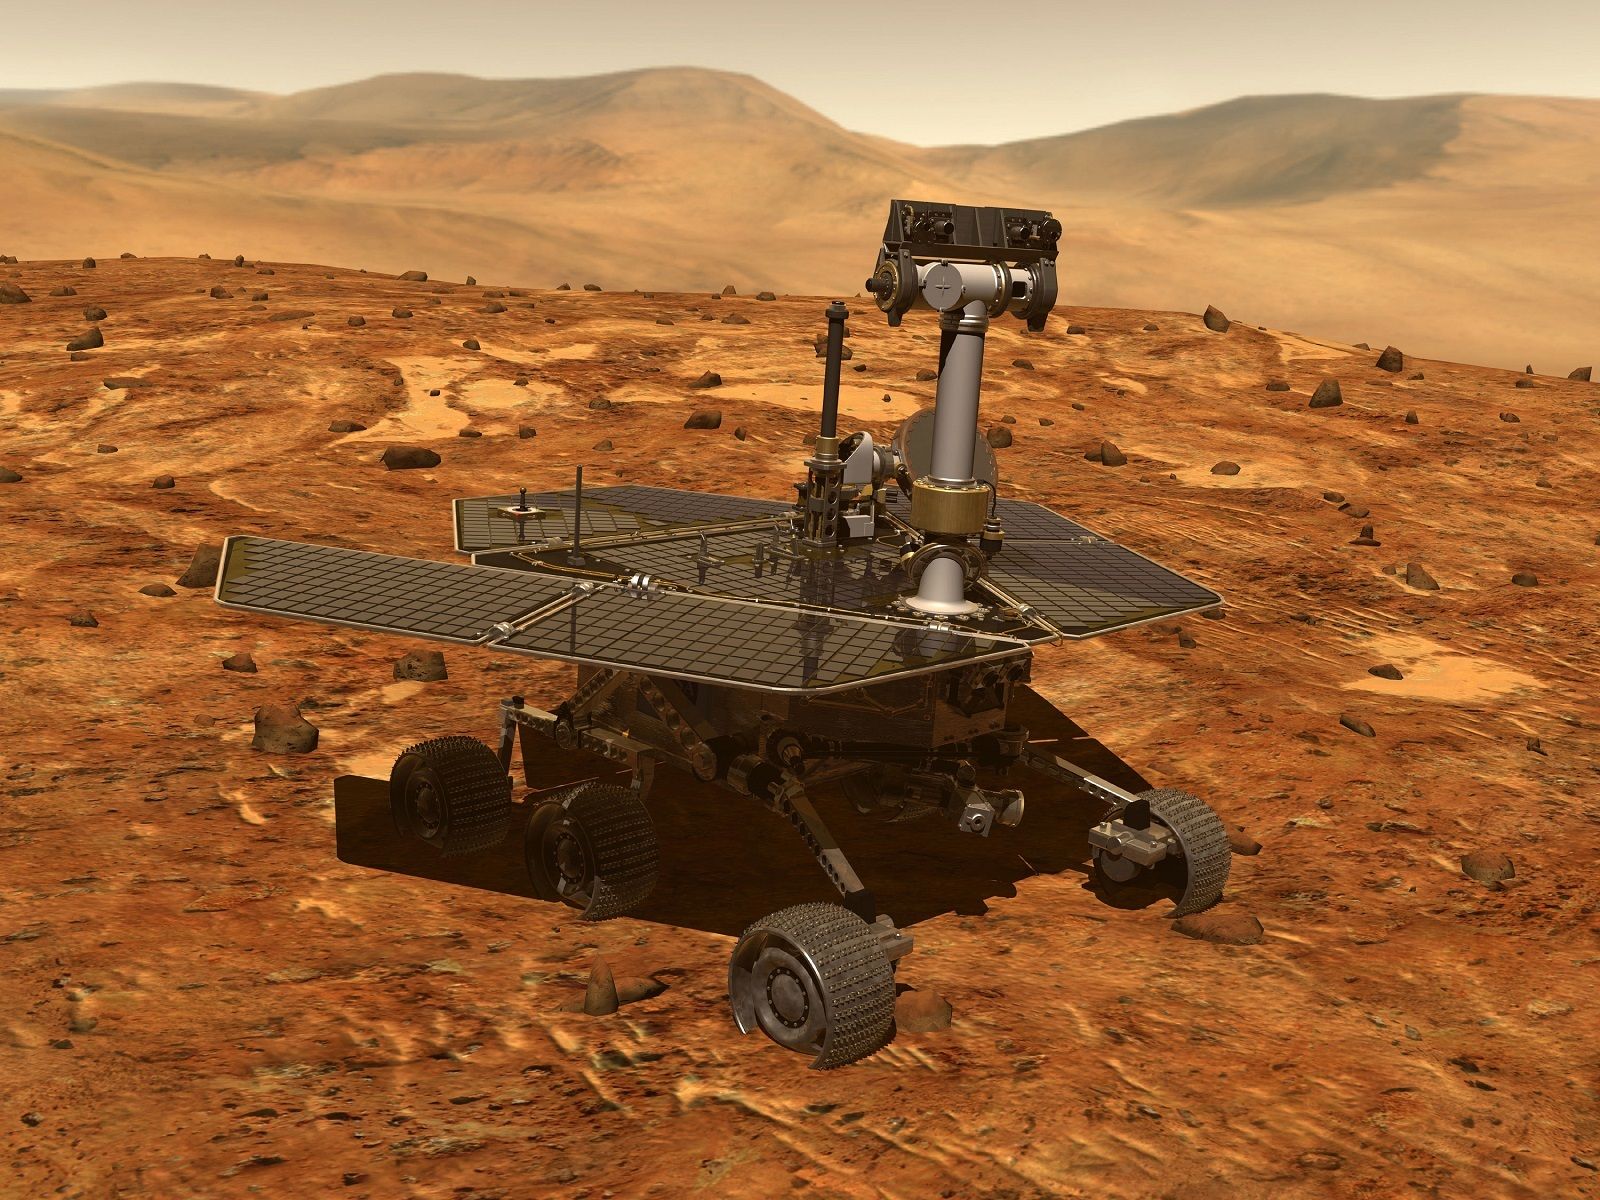 Opportunity Mars Rover Sets Off Earth Distance Record